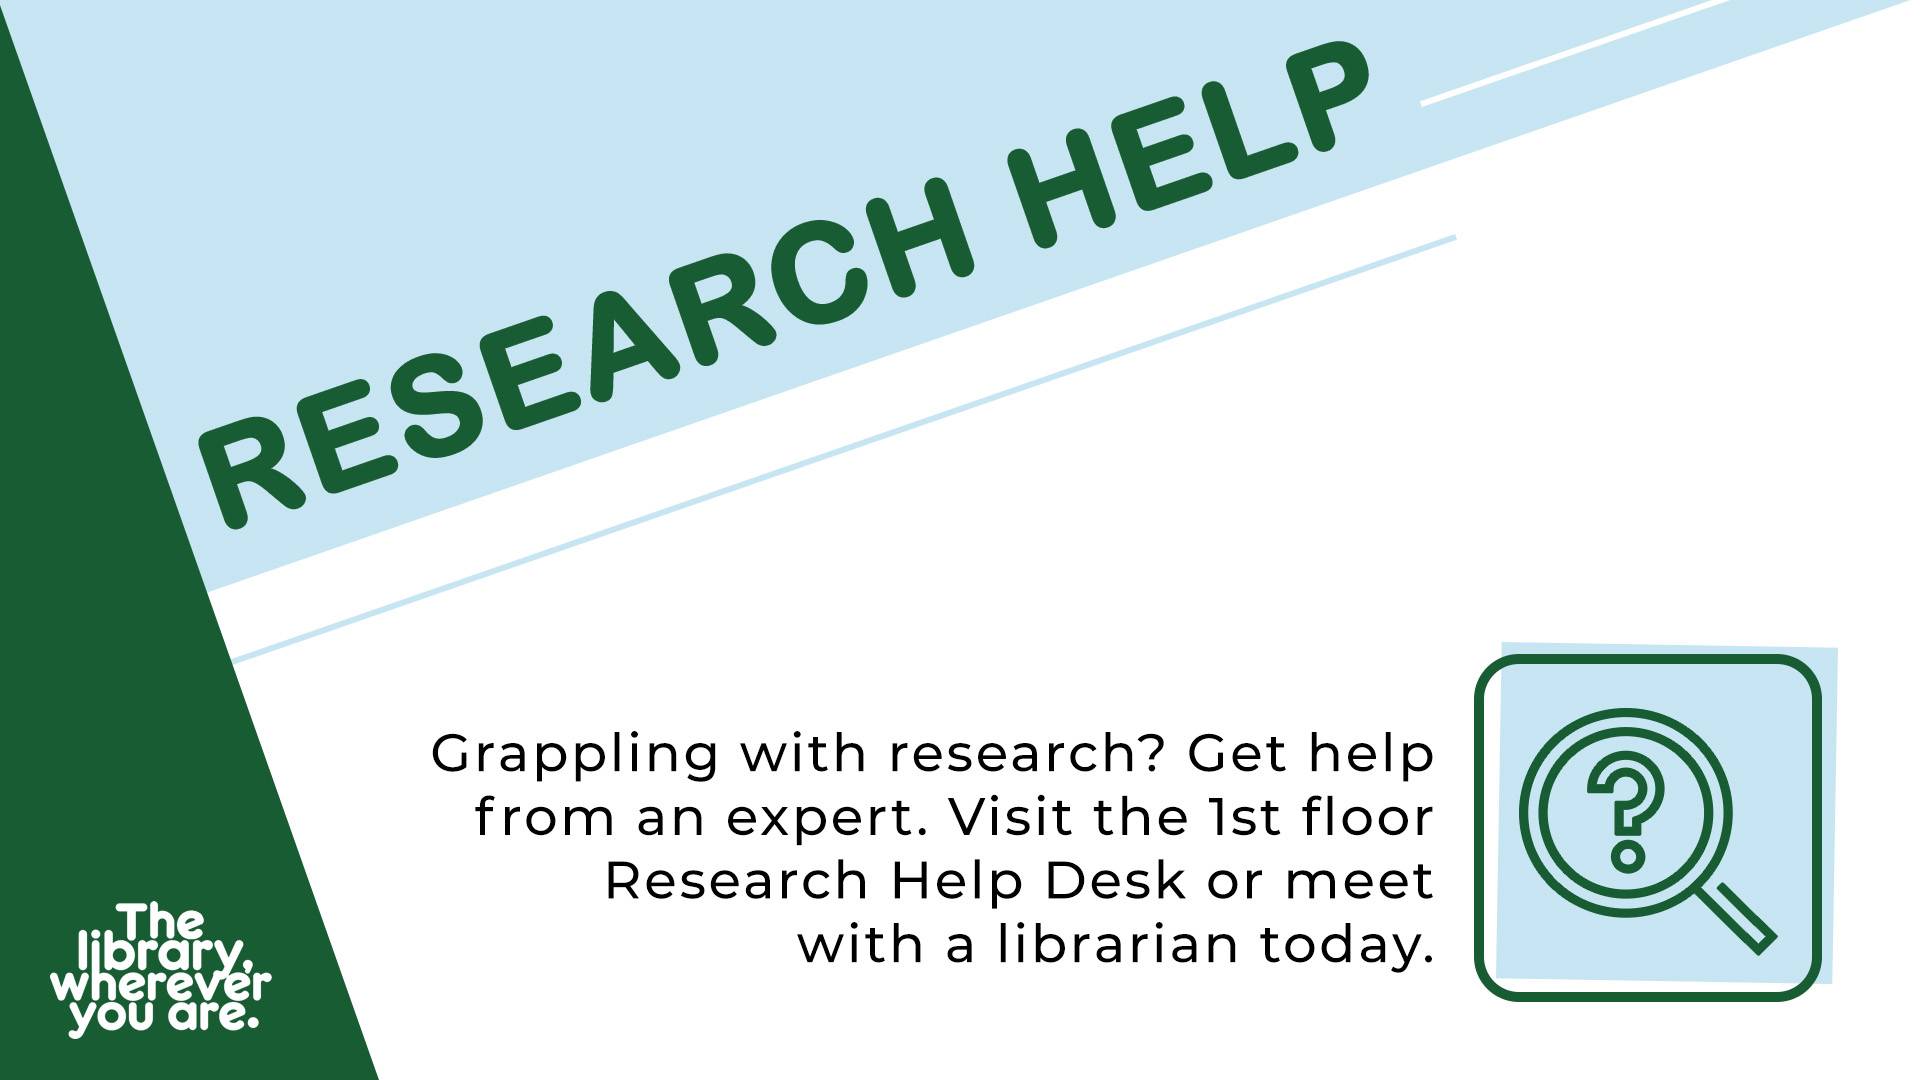 Research Help. Grappling with research? Get help from an expert. Visit the 1st floor Research Help Desk or meet with a librarian today.